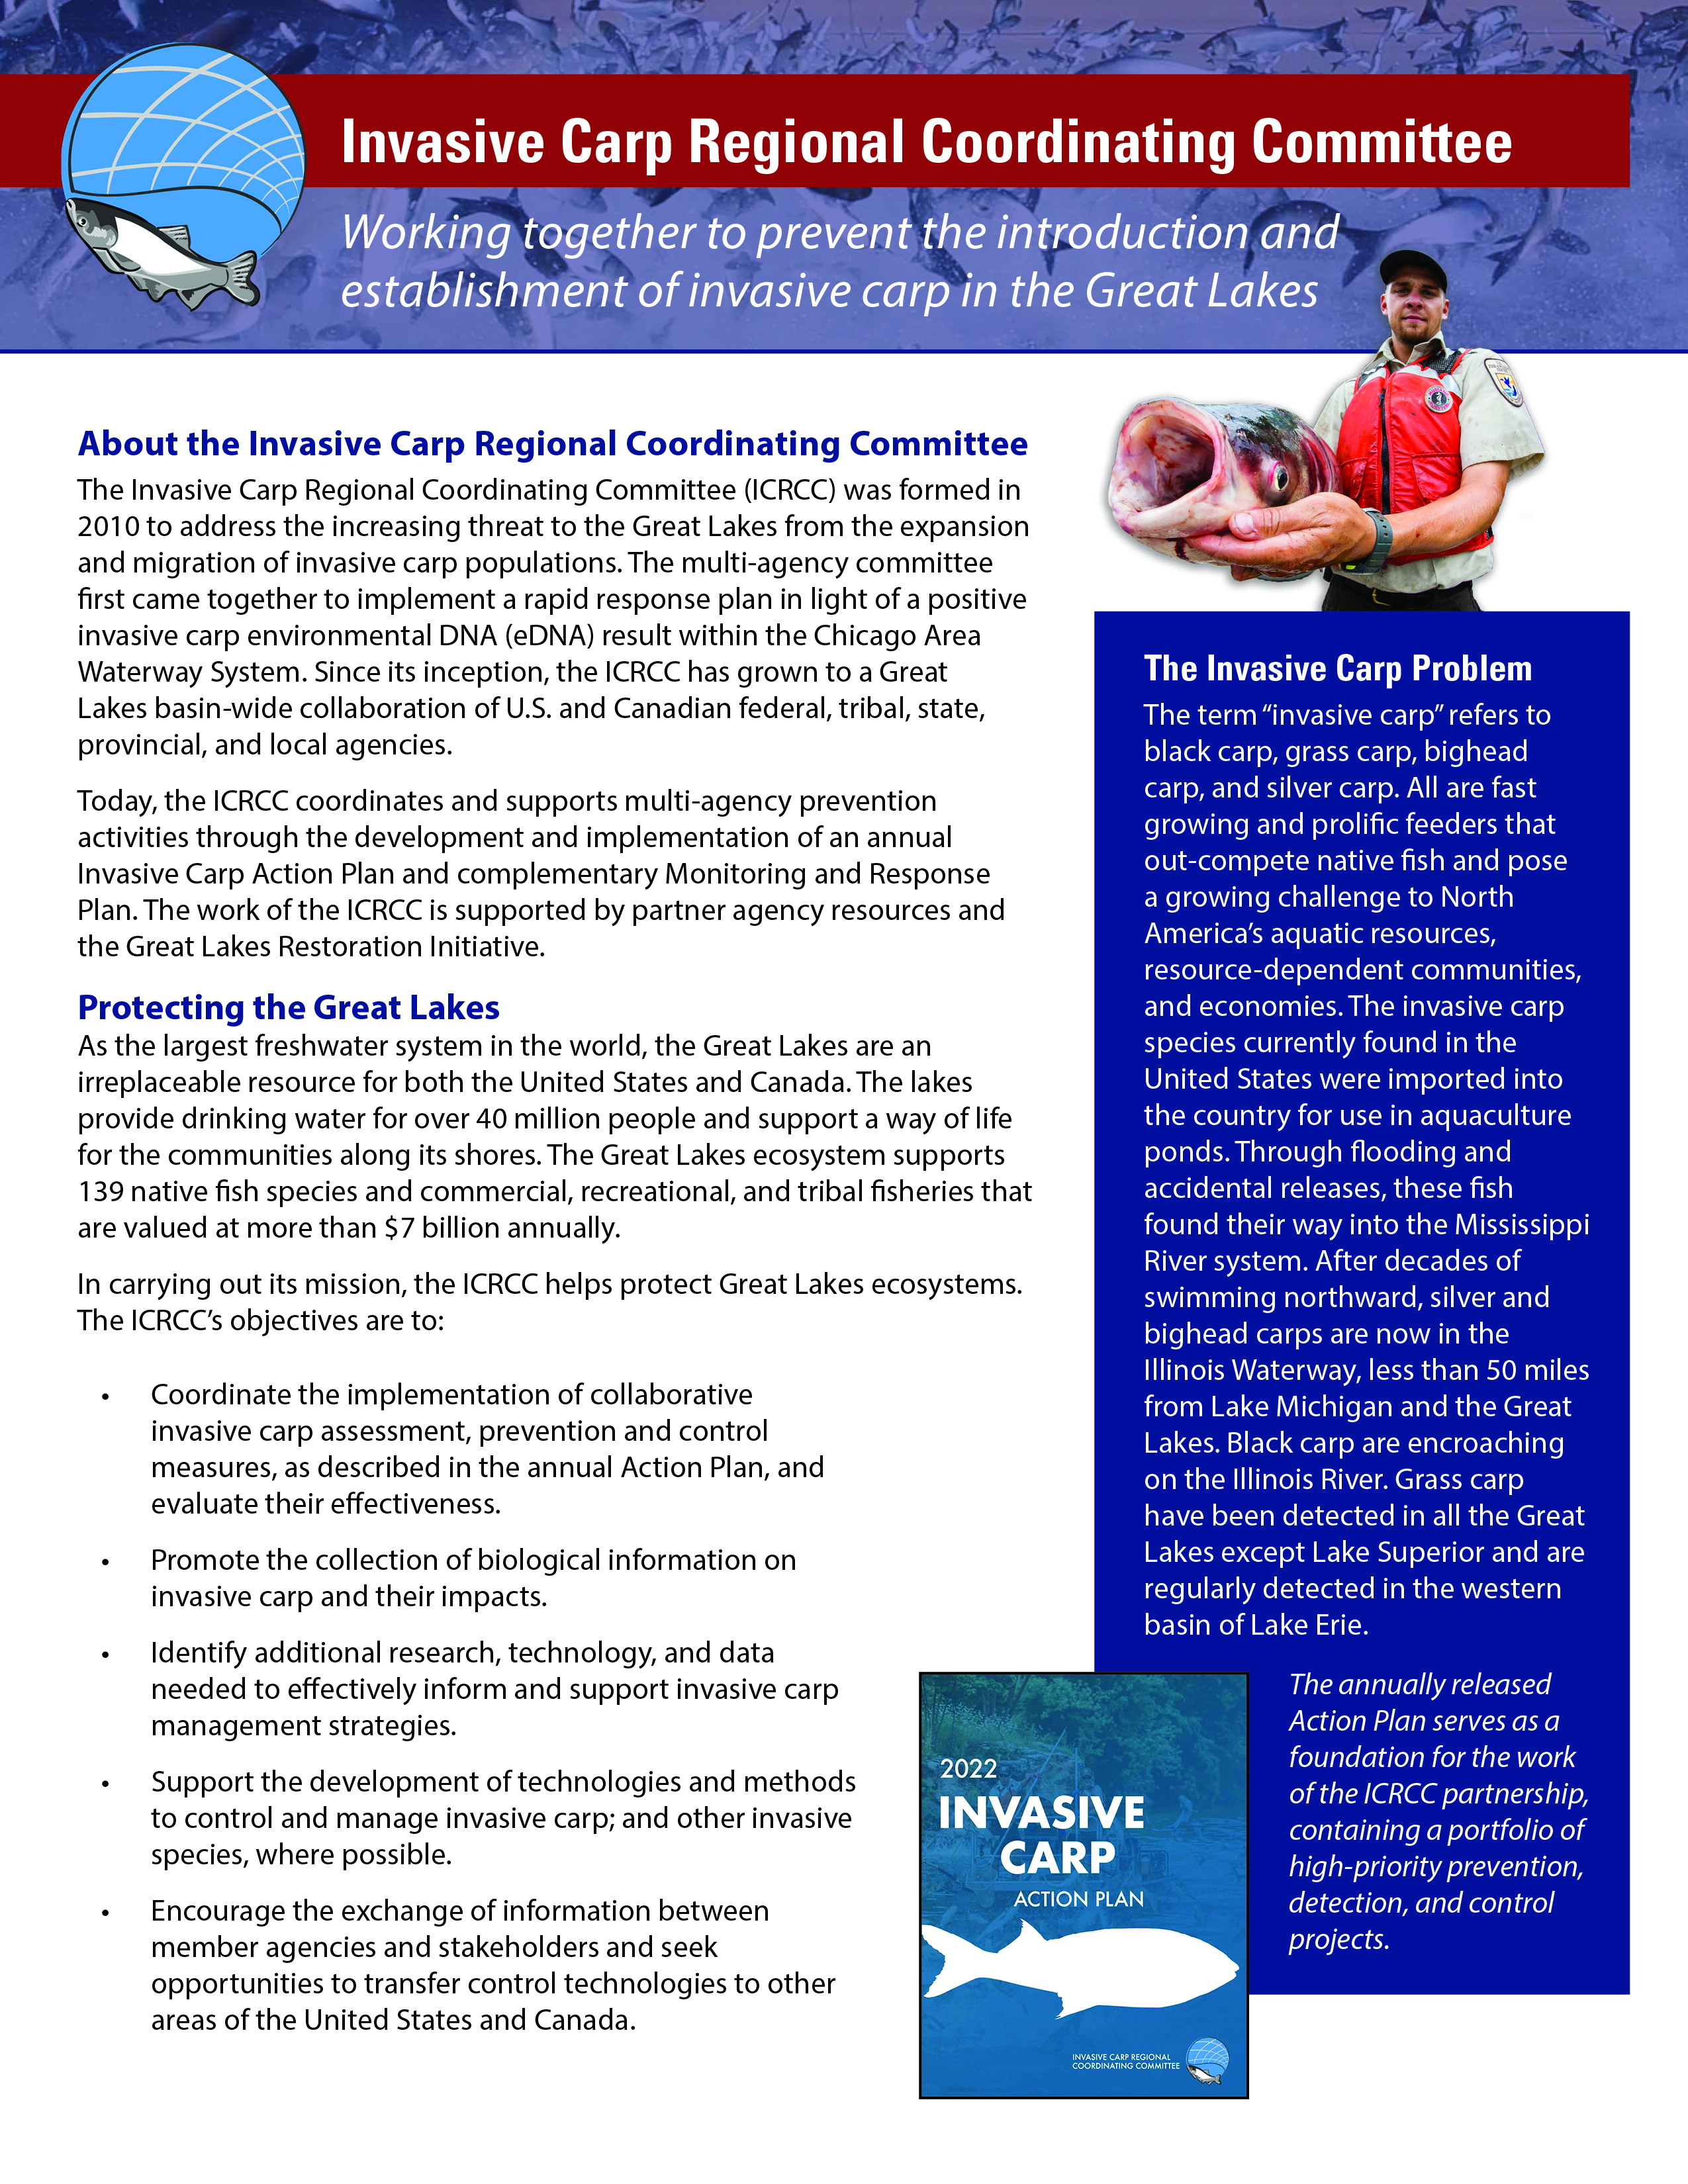 Invasive Carp Regional Coordinating Committee: Working together to prevent the introduction and establishment of invasive carp in the Great Lakes handout